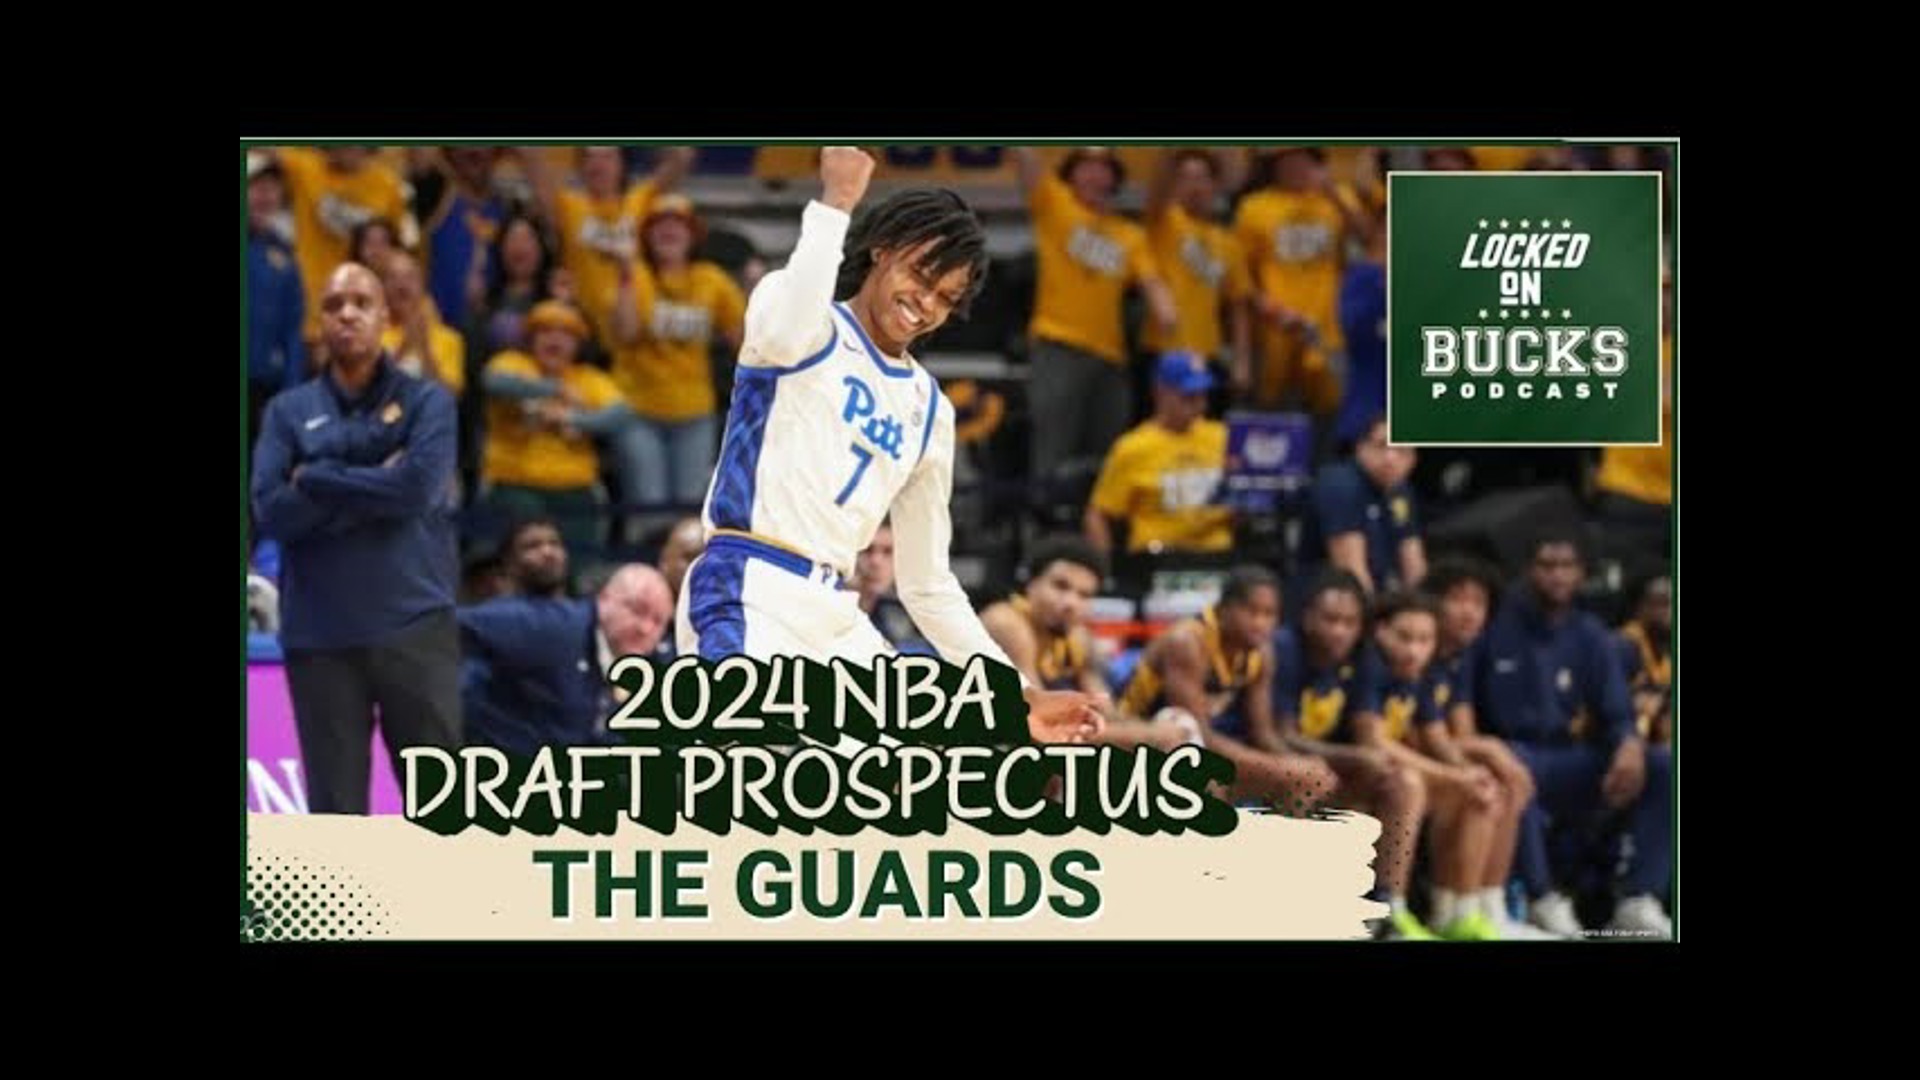 Justin and Camille wrap up their positional look at next week's draft by digging through some of the guards linked to the Bucks.